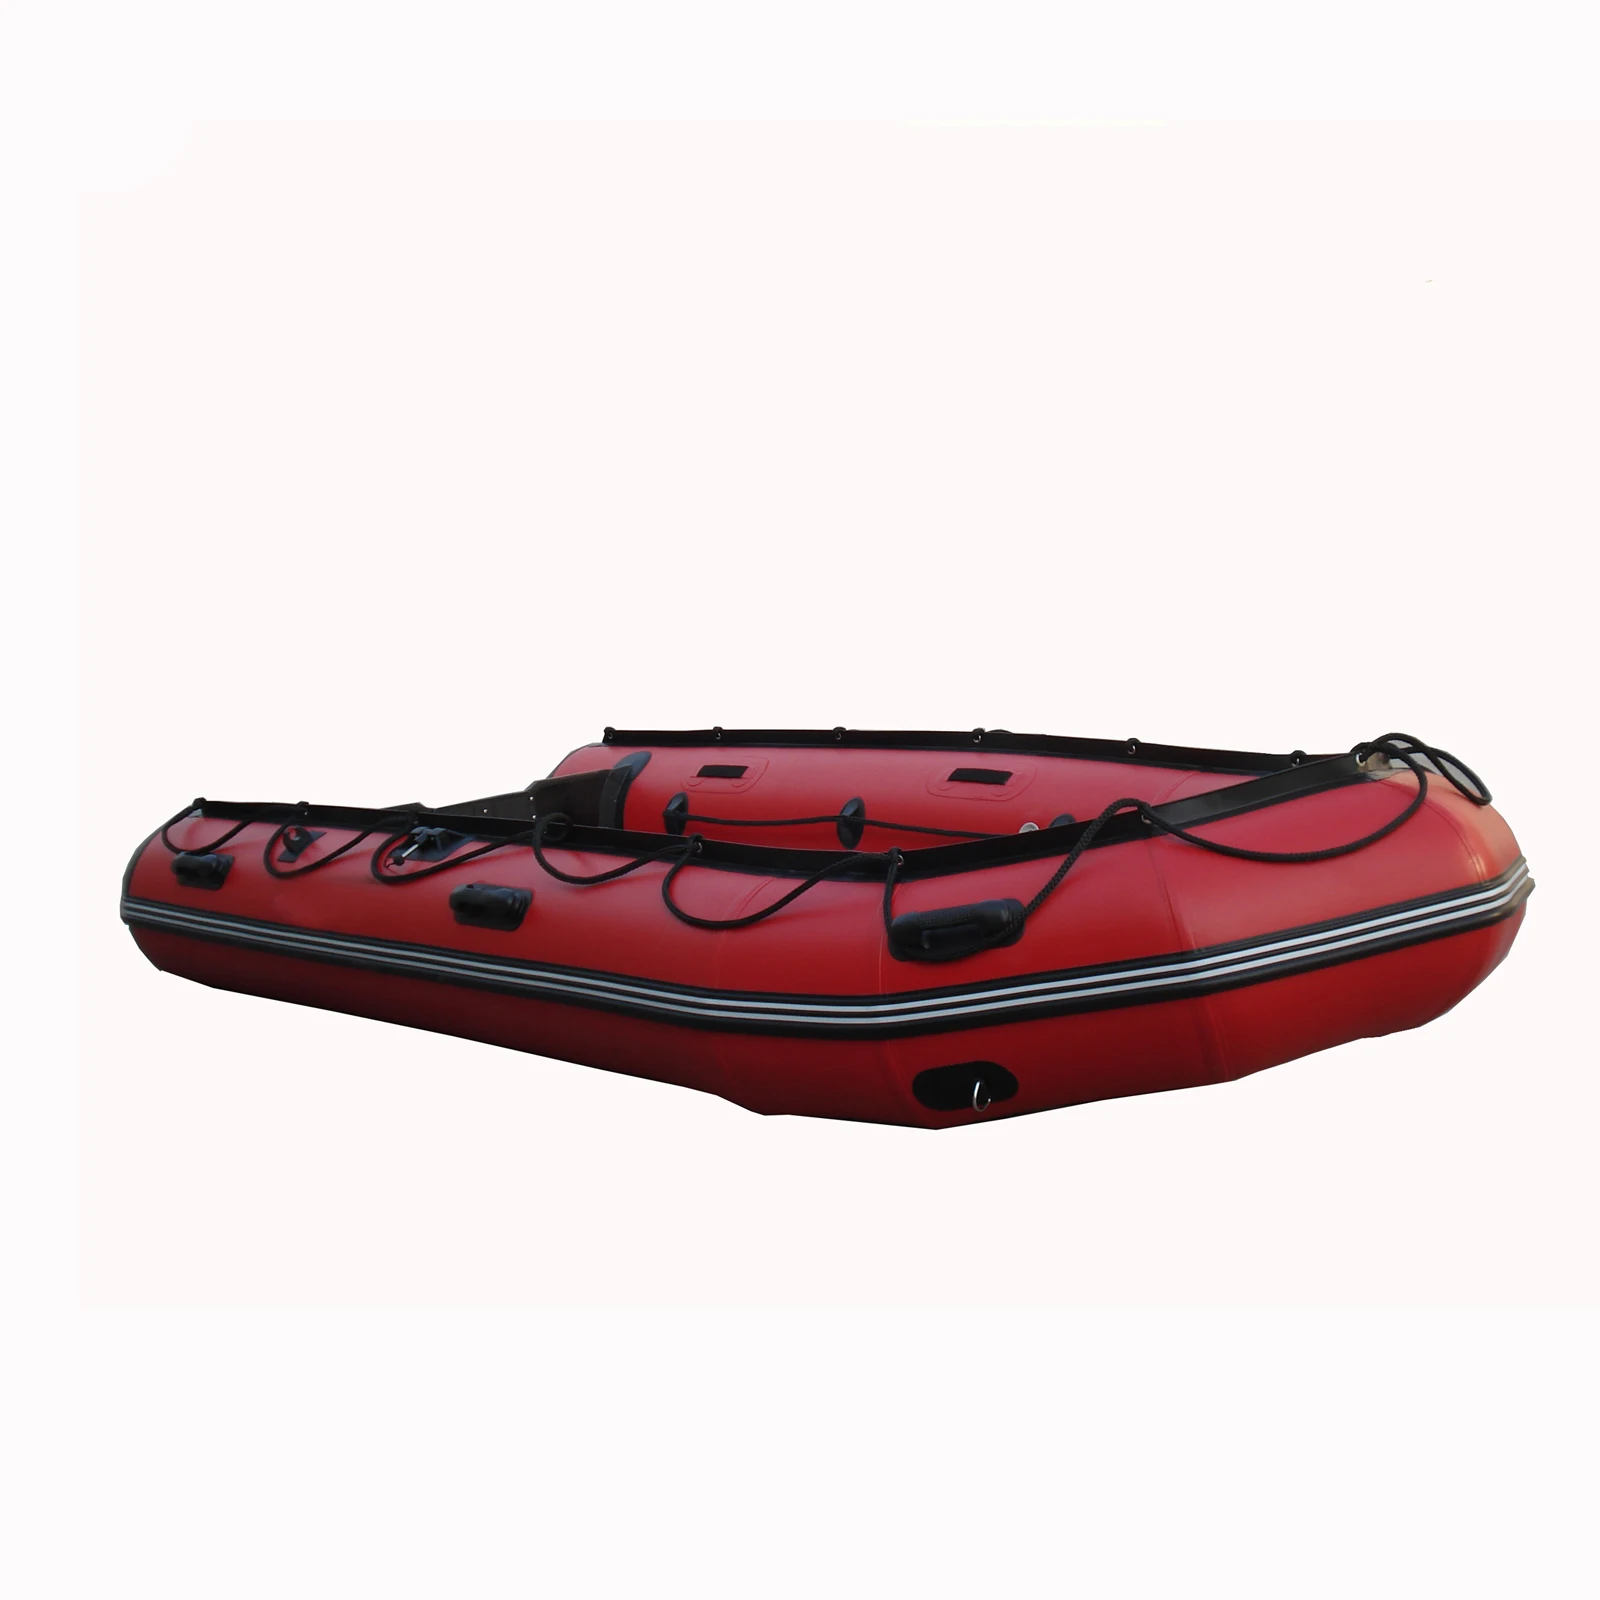 Liya 2-6.5m rubber dinghy foldable inflatable boat with aluminum floor